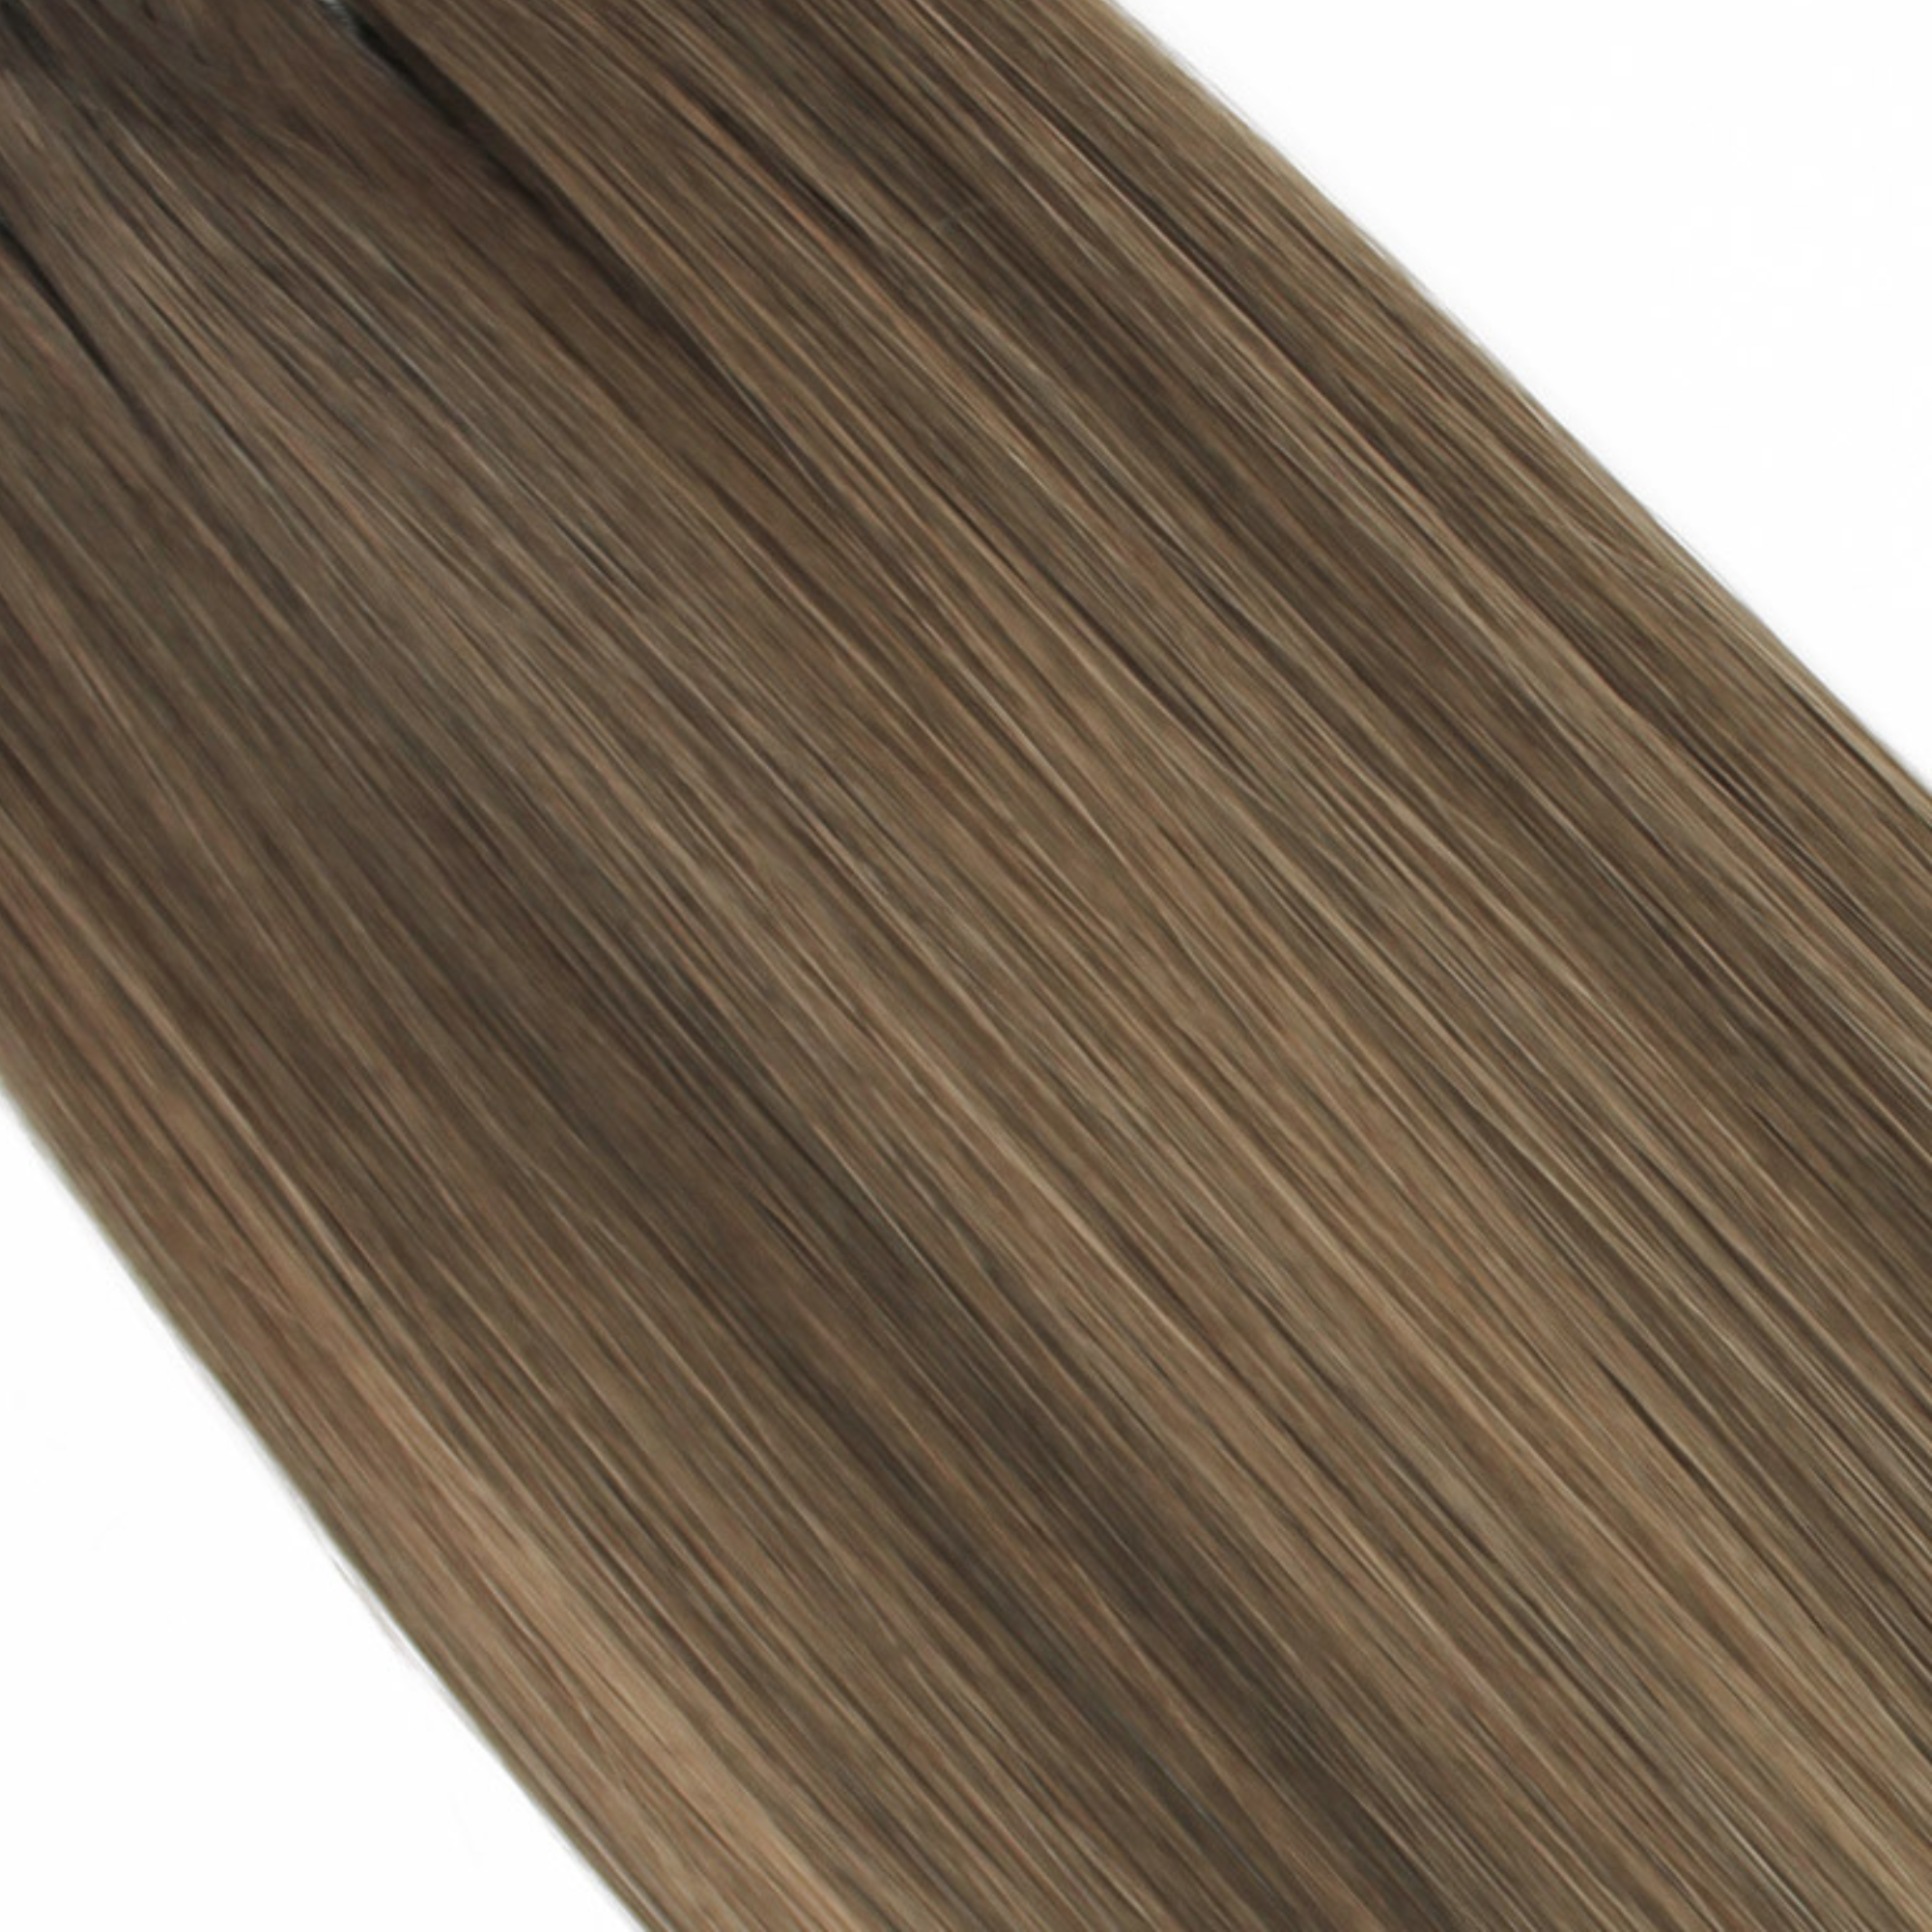 "hair rehab london 18" weft hair extensions shade swatch titled rooted caramel"